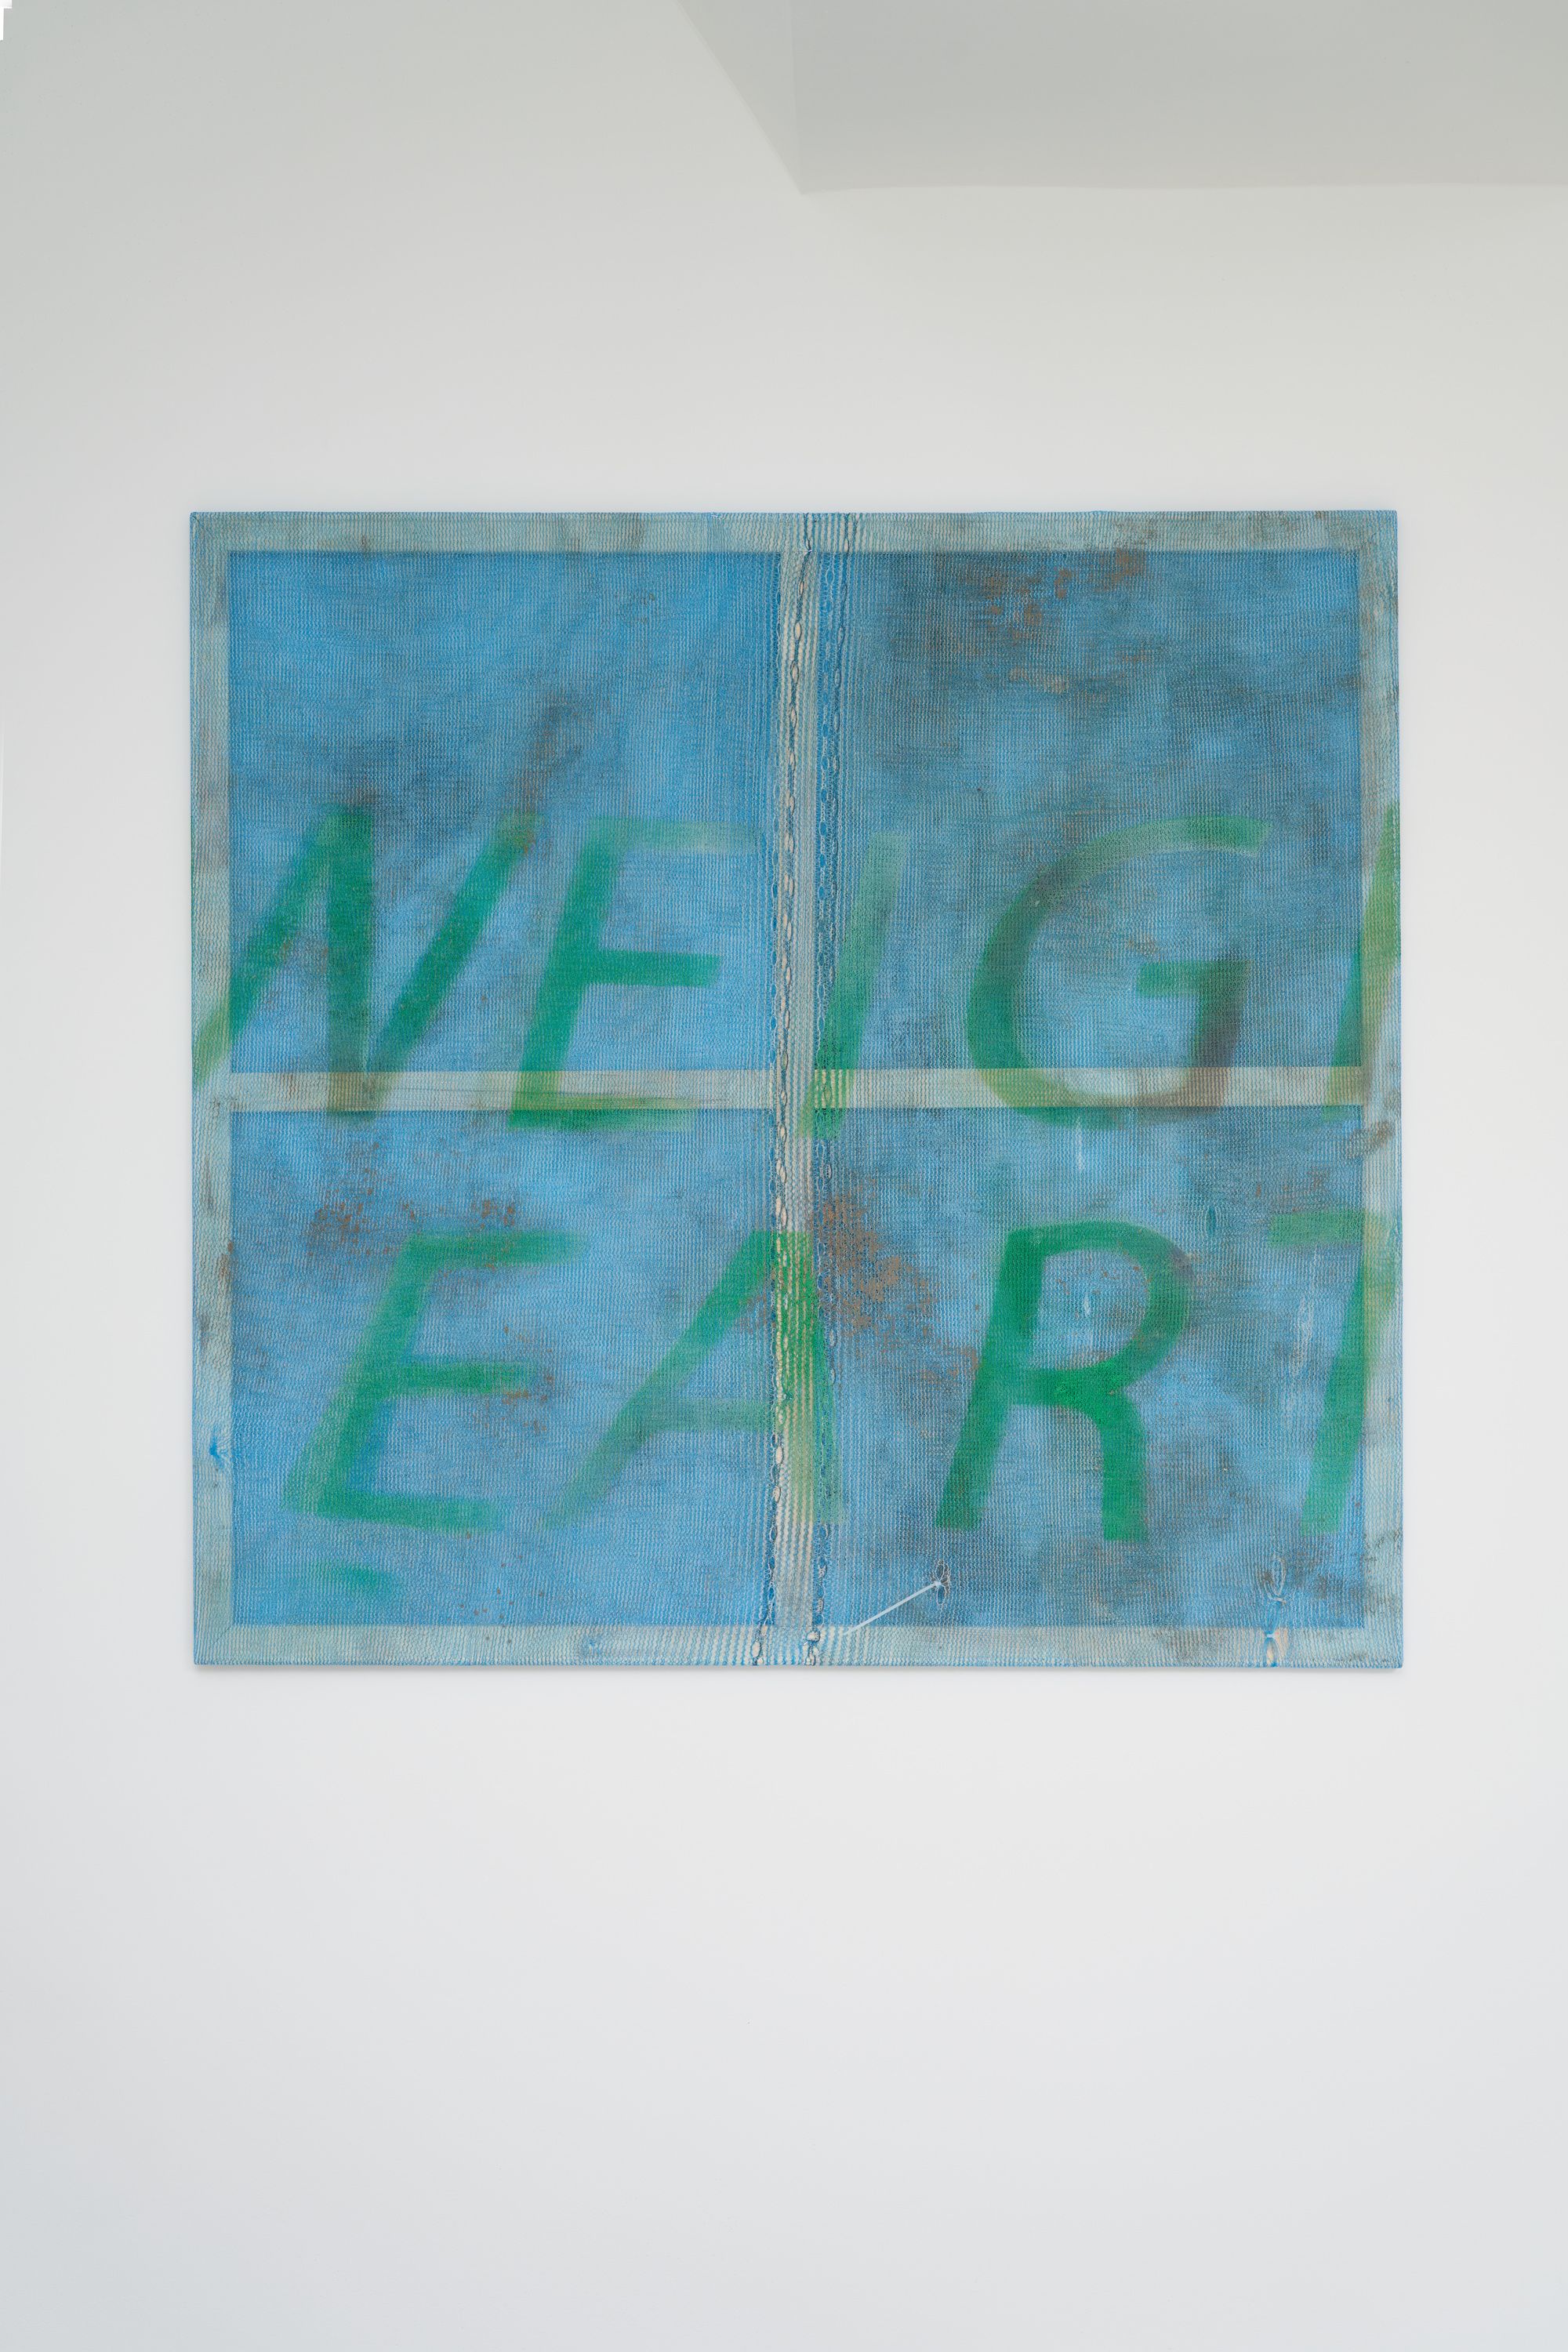 Gerry Bibby, Dust Jacket footnote 2 for DW. Weight of the Earth, 2023, Wooden stretcher, plastic scaffolding net, spray paint, dirt, 130 ⁠× ⁠140 ⁠× ⁠2 ⁠⁠cm